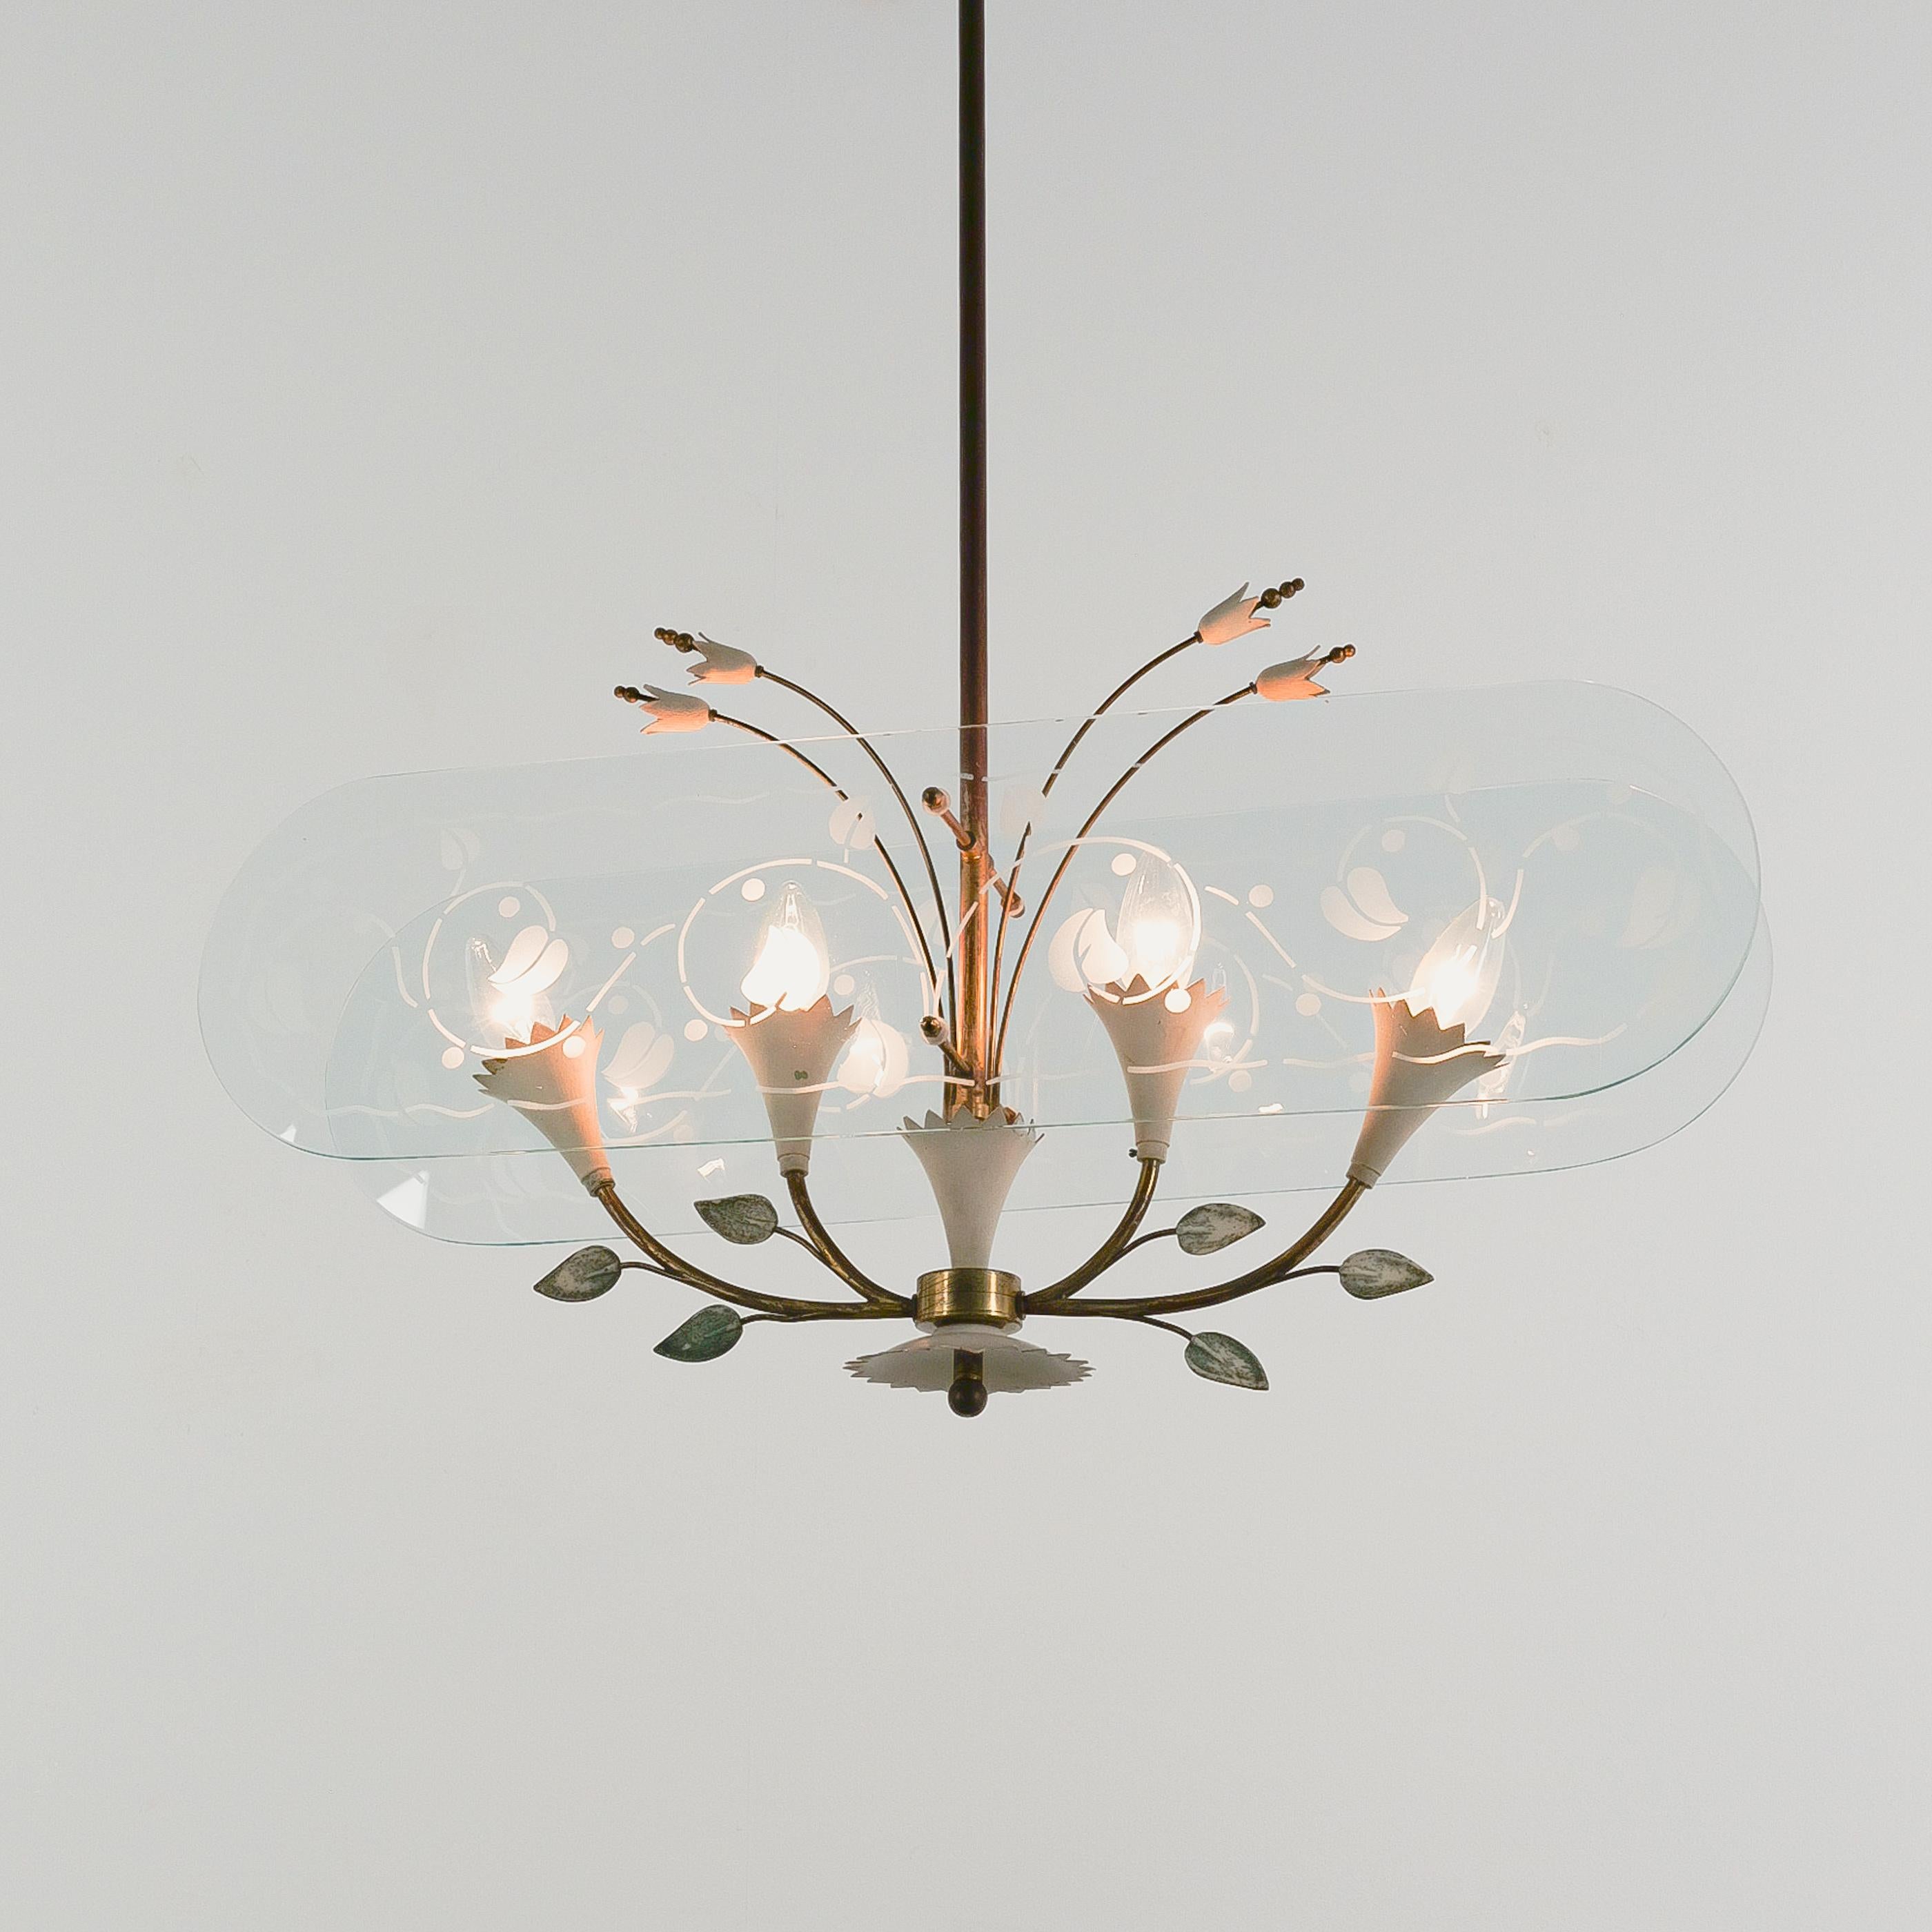 Italian Pietro Chiesa Chandelier Floral Glass with Etched Details Italy, 1950 For Sale